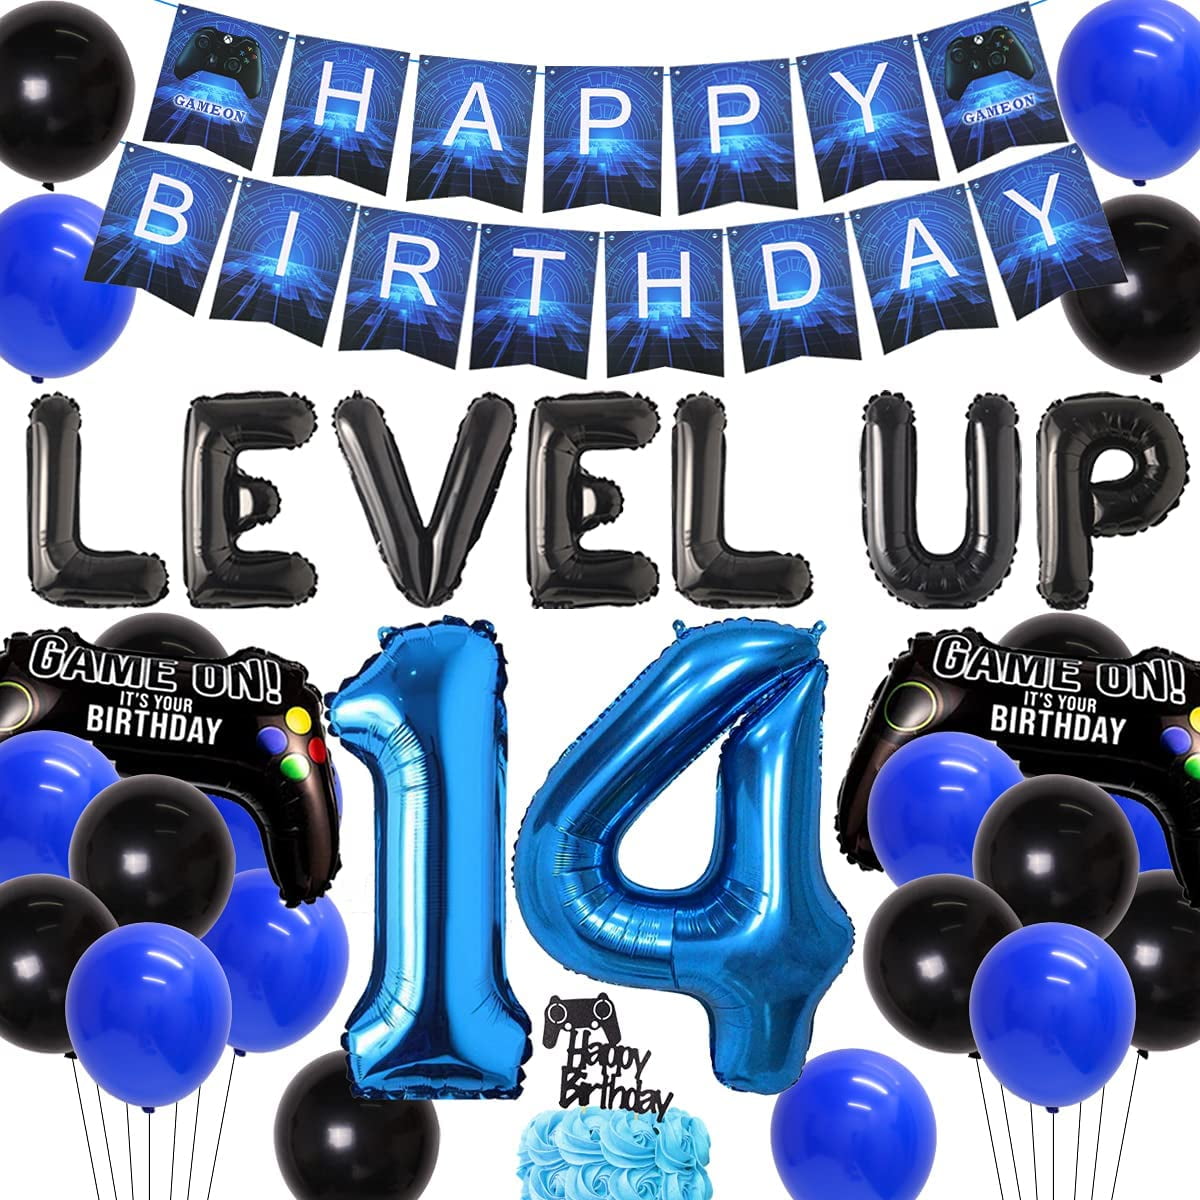 Video Game 14th Birthday Decorations for Boys - Level up Party Supplies, Happy Birthday Banner, number 14 Balloon, Cake Topper, Controller Balloons for Game On Party Favors - Walmart.com